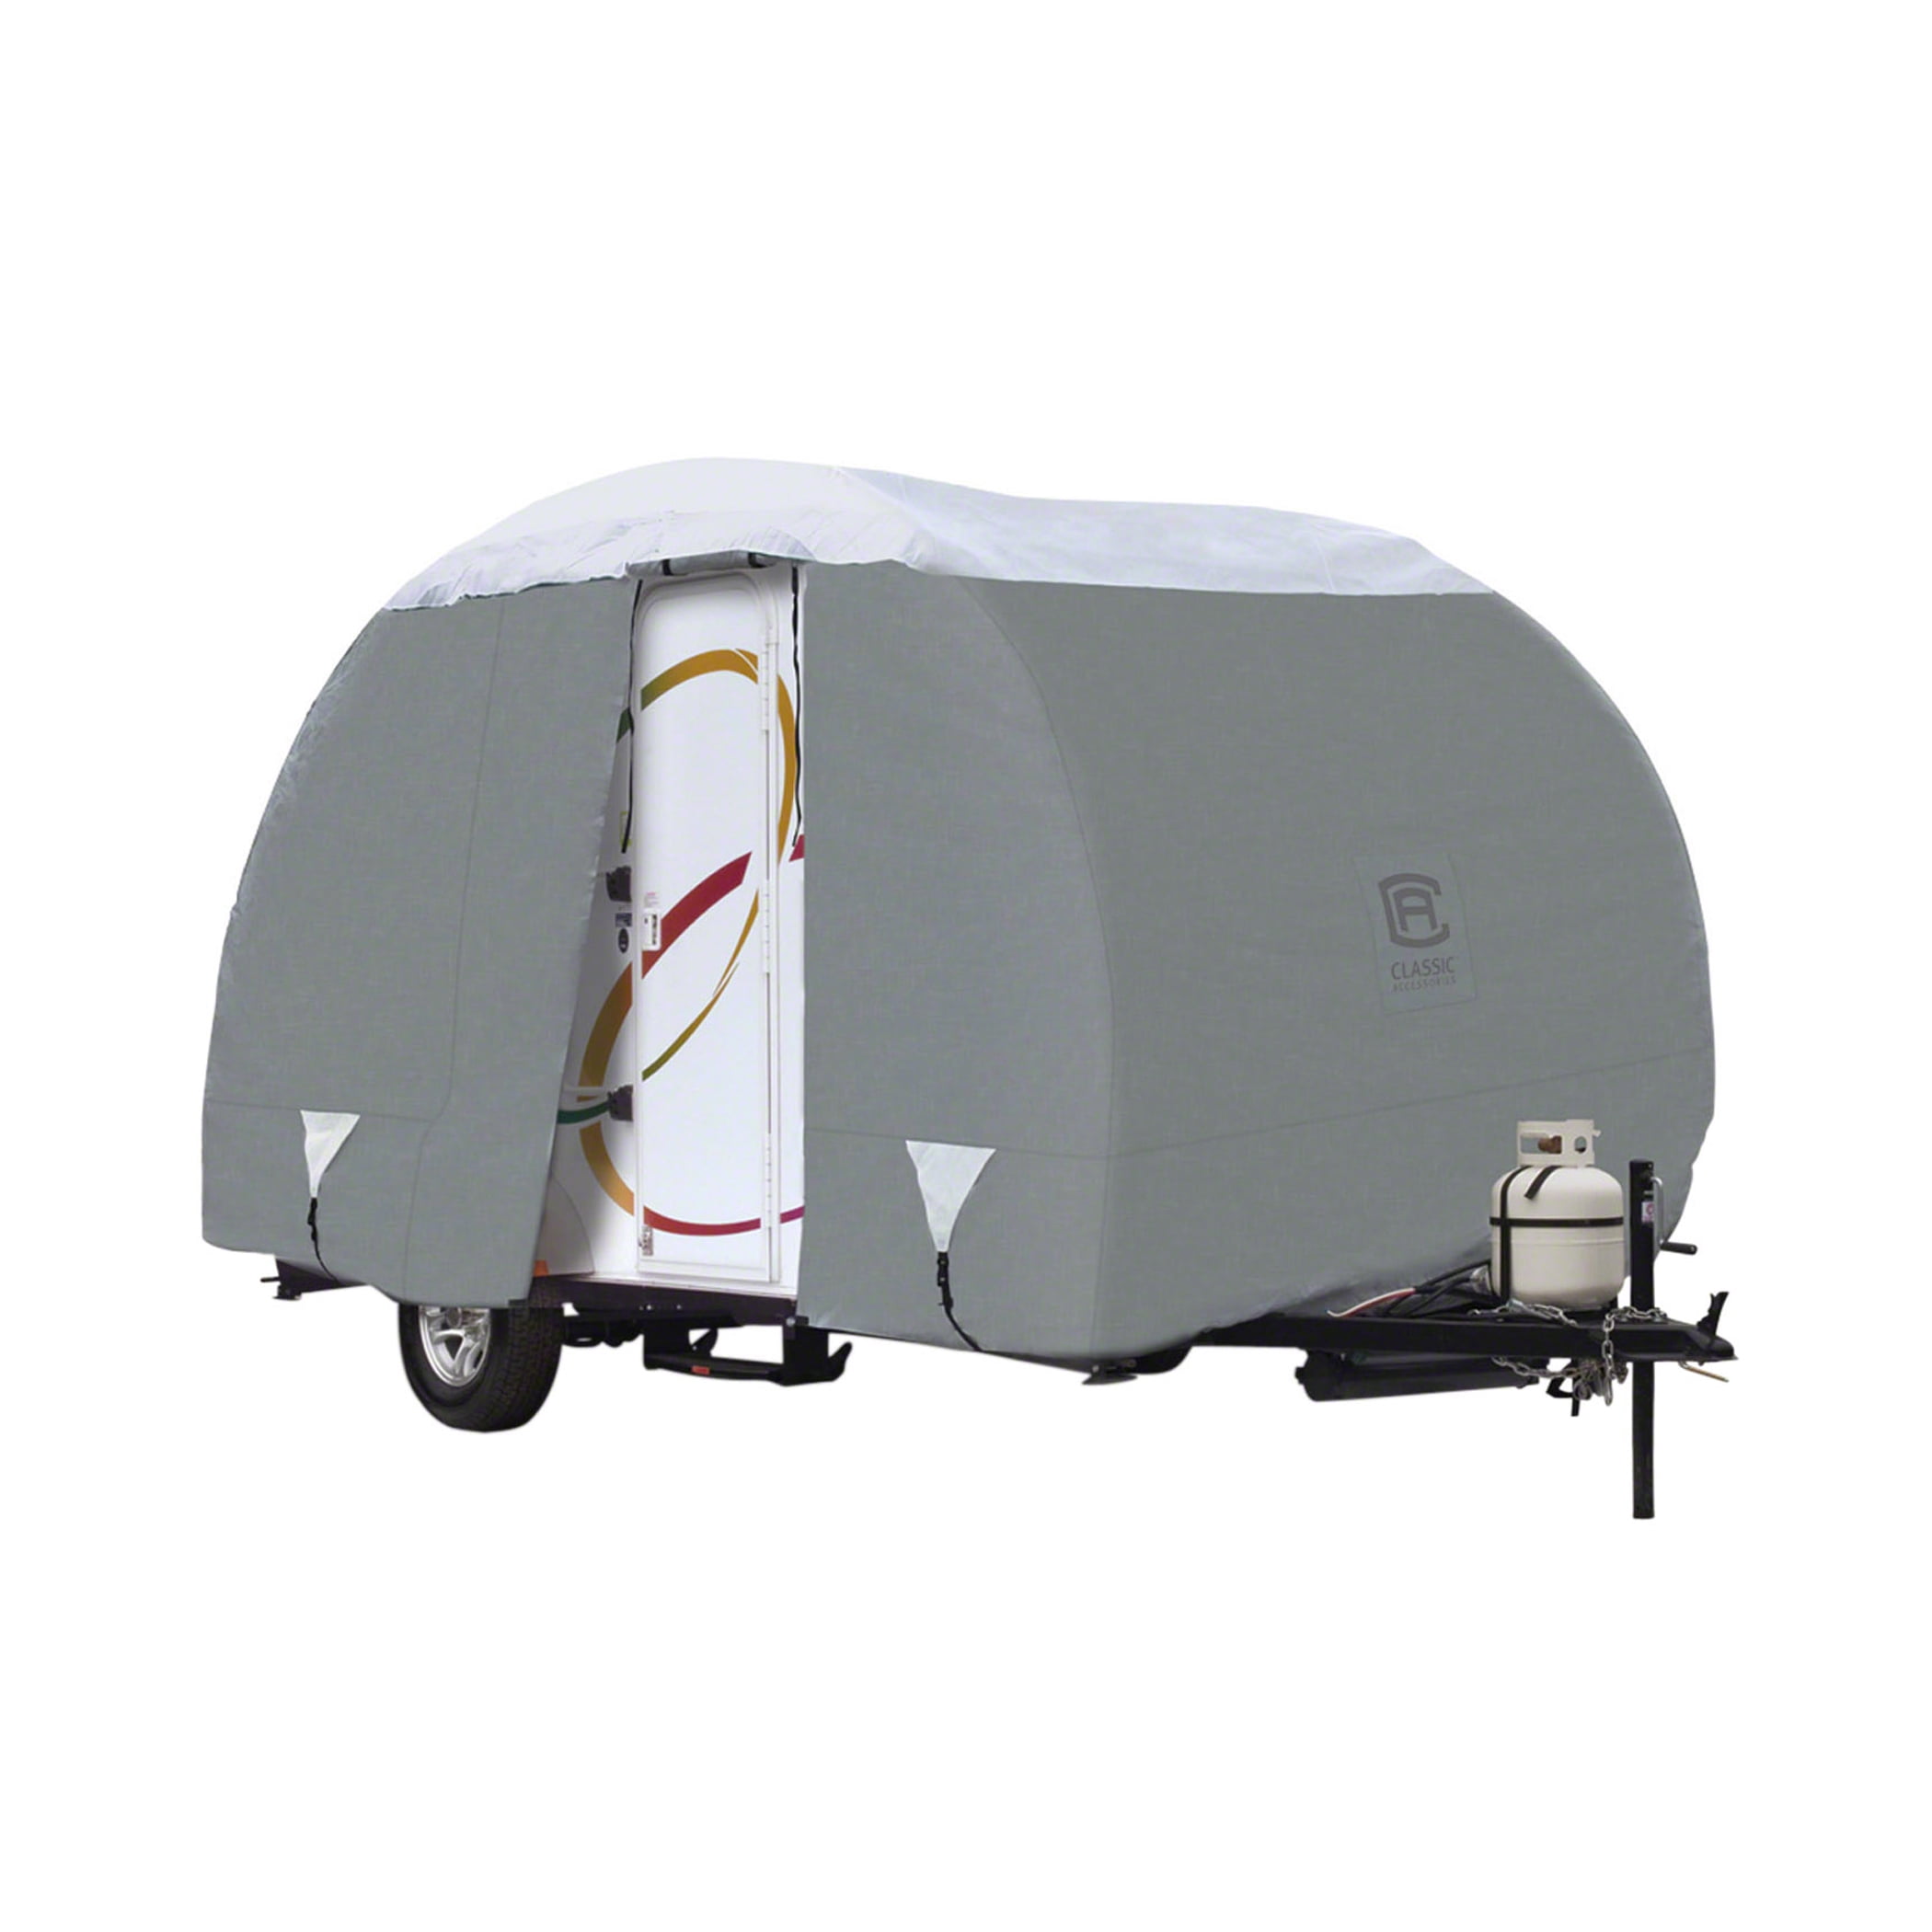 Waterproof Durable Teardrop R-Pod Travel Trailer Storage Cover Fits Up To 18 8 Long and 6 Wide Trailers RP-176 and RP-177 RP-172 RP-176T Direct Fitment for Forest River R-Pod Model RP-171